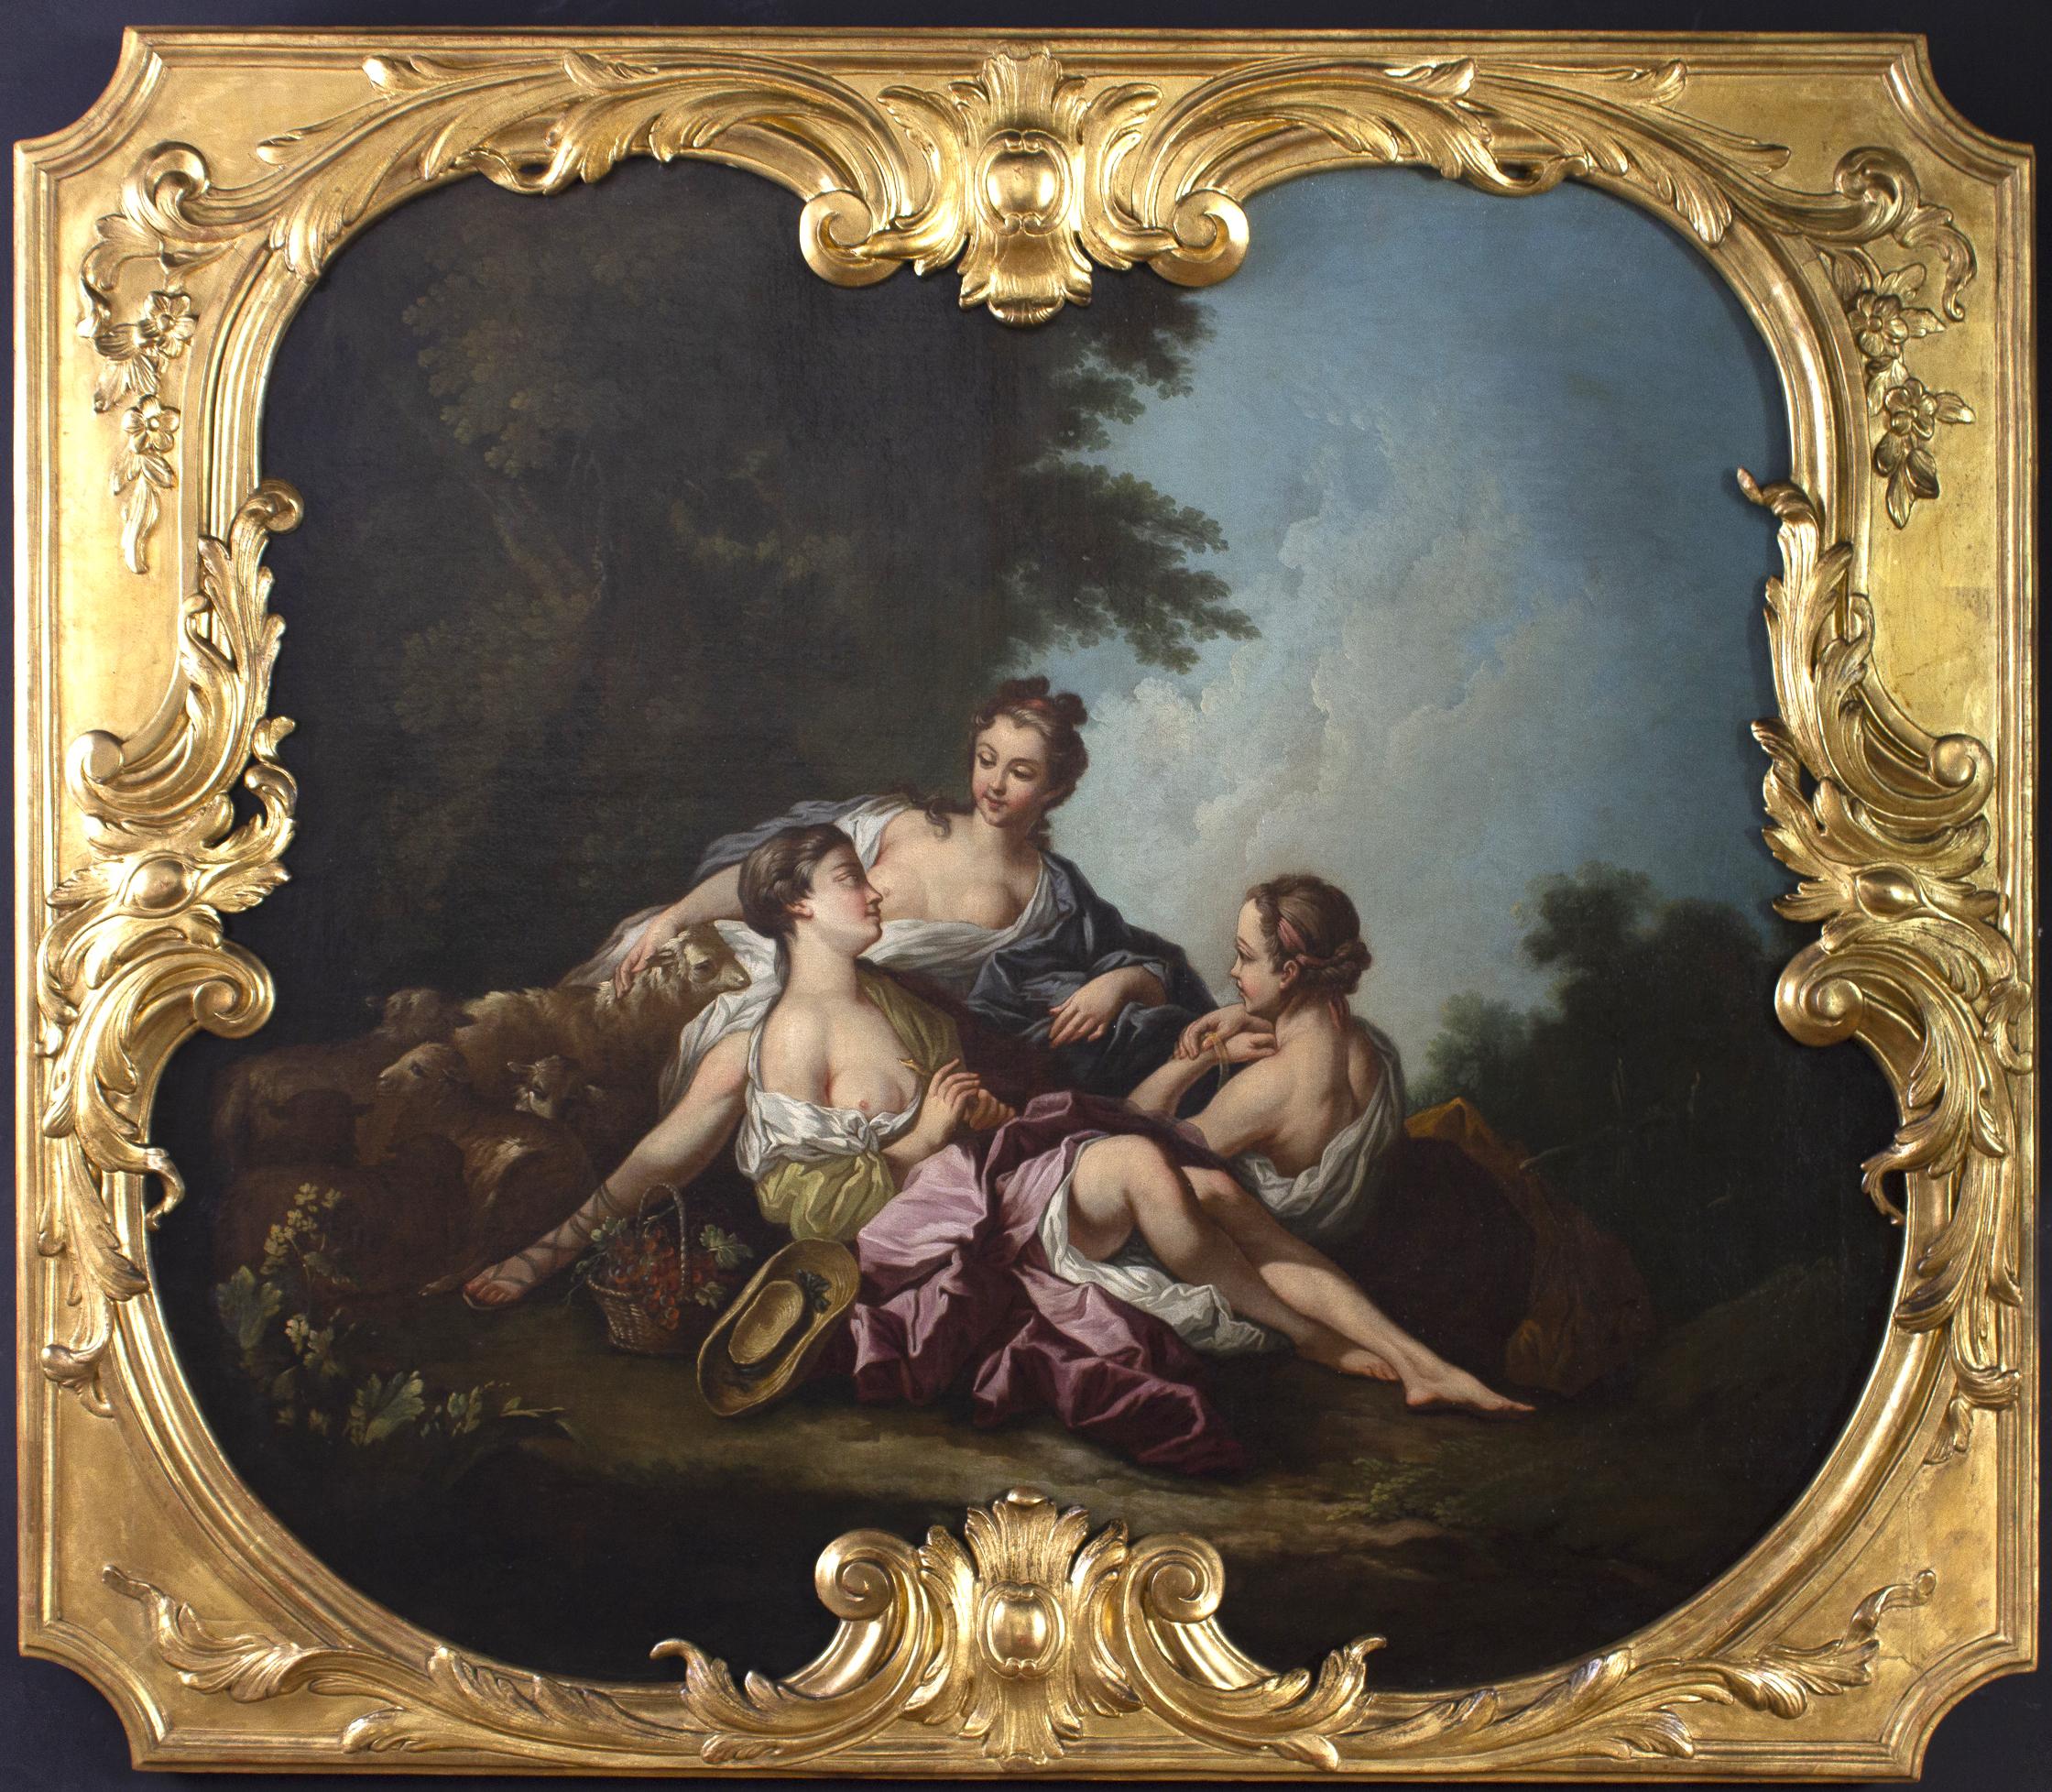  Amazing works of the genre scene,  dates to the late 18th century. After the famous  French artist Francois Boucher, who was the court painter to King Louis XV.
It is in its original finely carved and gilded wood frame and painted in oil on canvas.